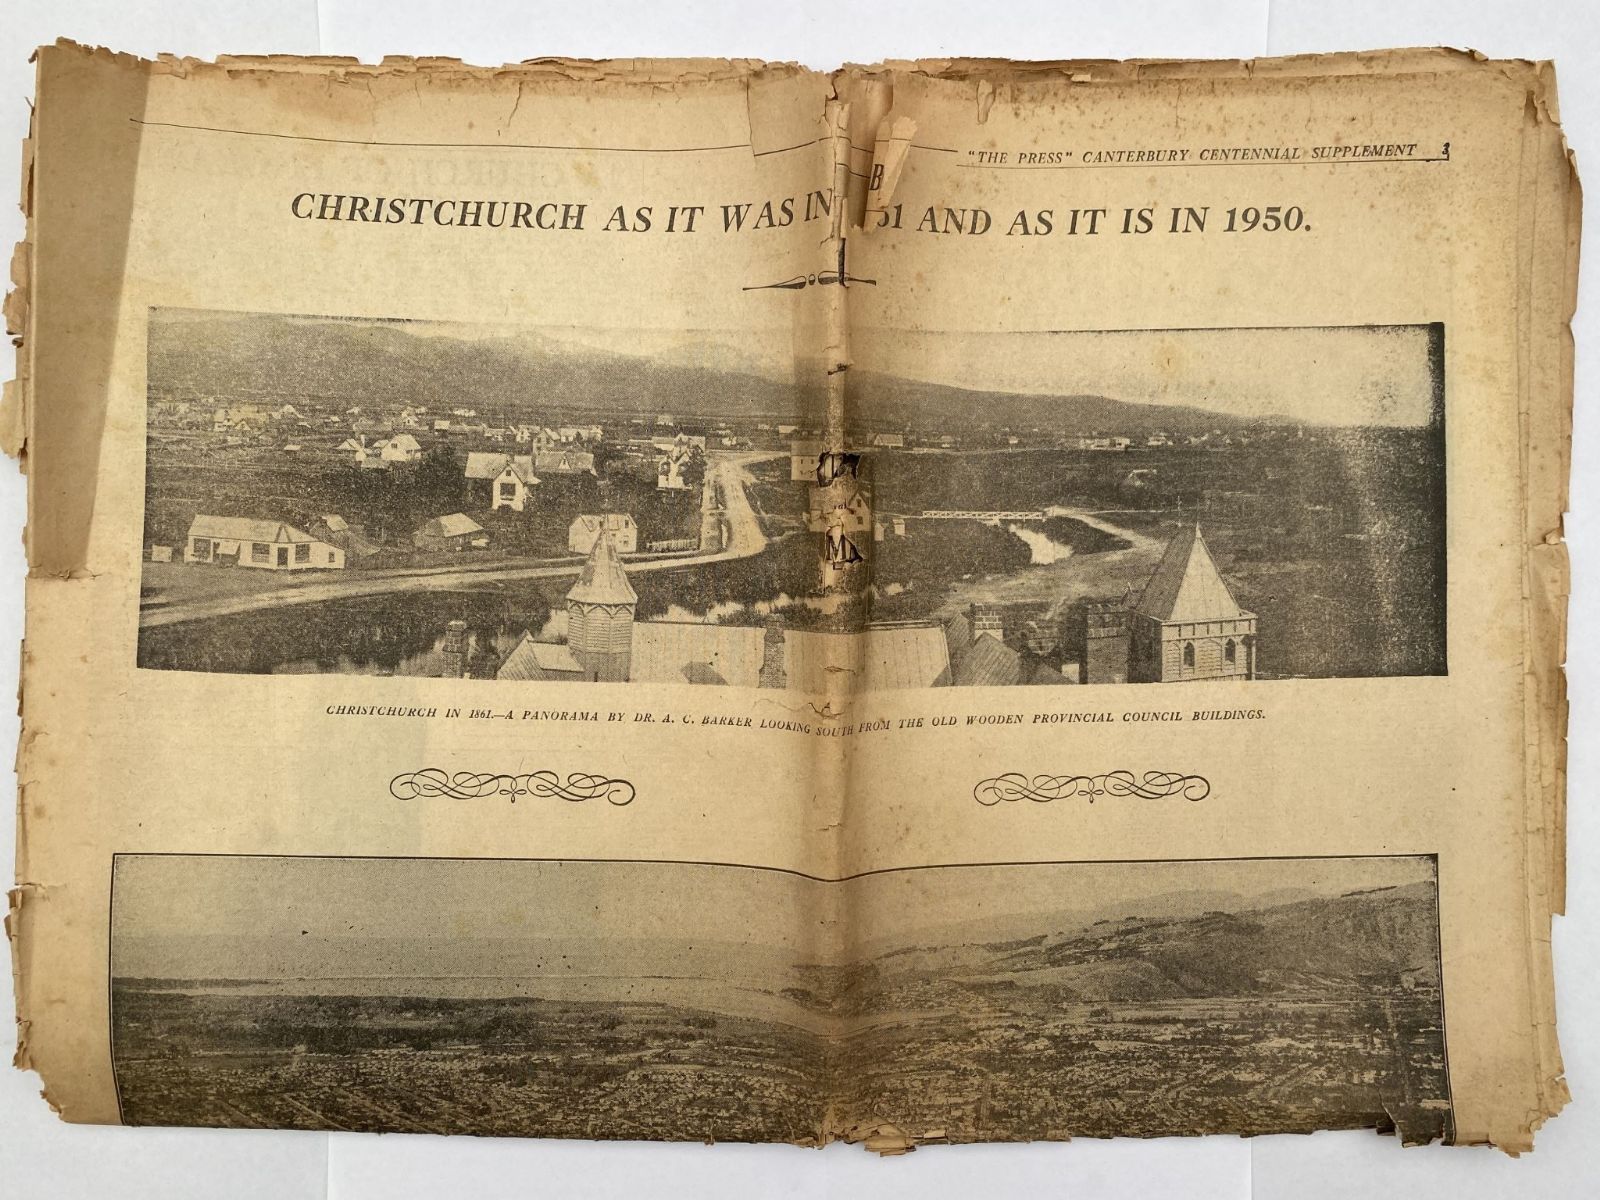 OLD NEWSPAPER: The Christchurch Press - As it was in 1861 and as it is in 1950